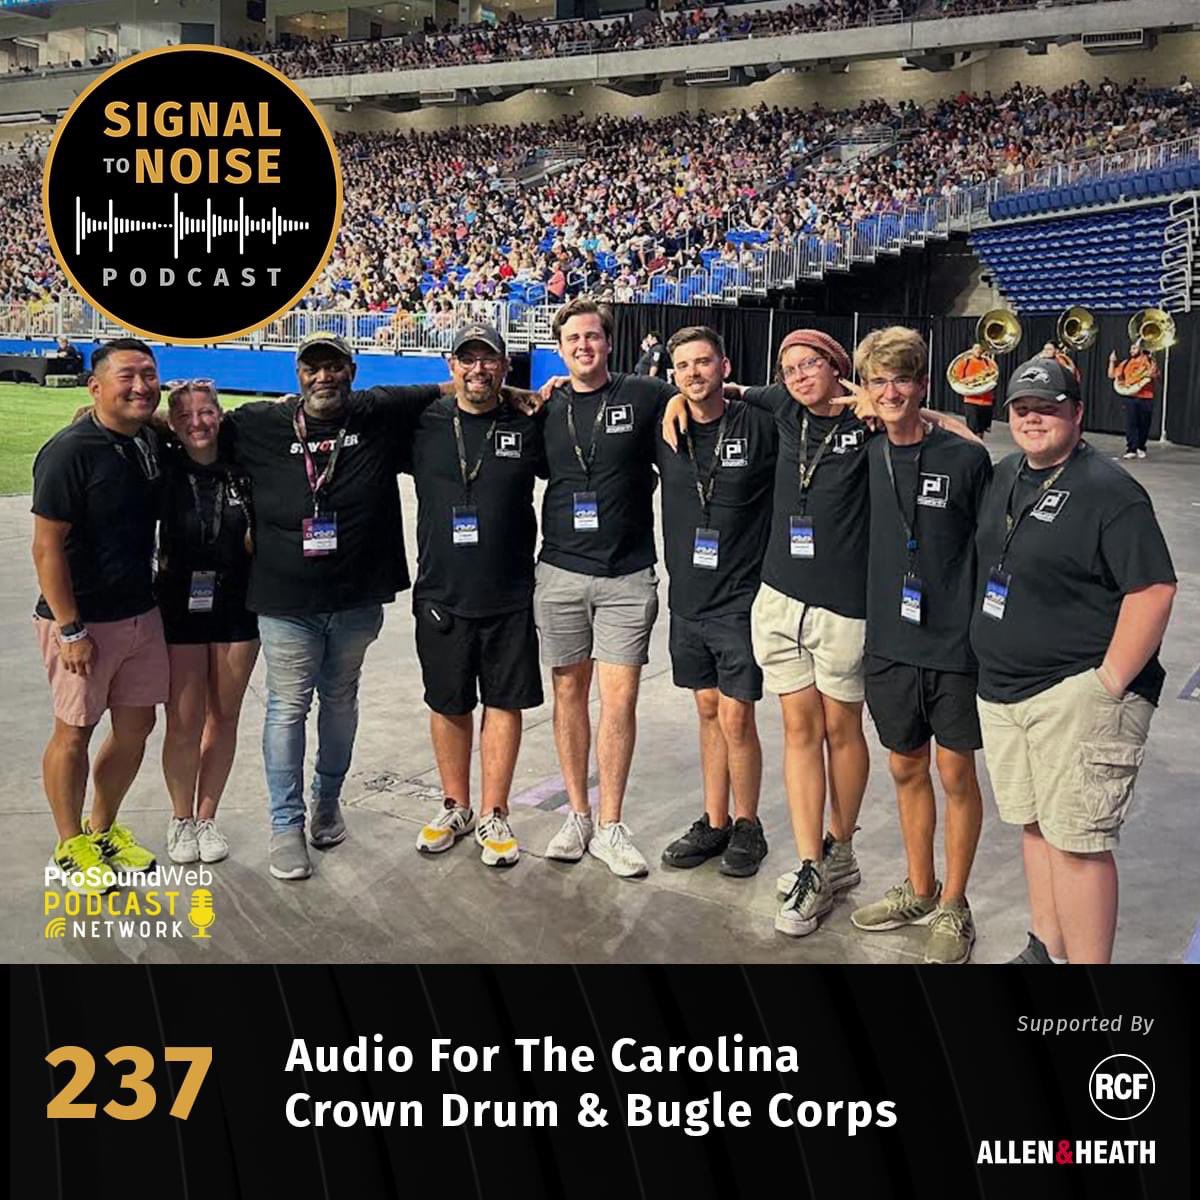 — 𝐒𝐢𝐠𝐧𝐚𝐥 𝐓𝐨 𝐍𝐨𝐢𝐬𝐞 𝐏𝐨𝐝𝐜𝐚𝐬𝐭 chats with the Crown Audio Team! Episode 237: Audio For The Carolina Crown Drum & Bugle Corps. Featuring team members Jonathan Yoo, Rosa Westfall, Tyler Hanson and Cole O’Malley. 🔈Listen Here ➡ prosoundweb.com/signal-to-nois…